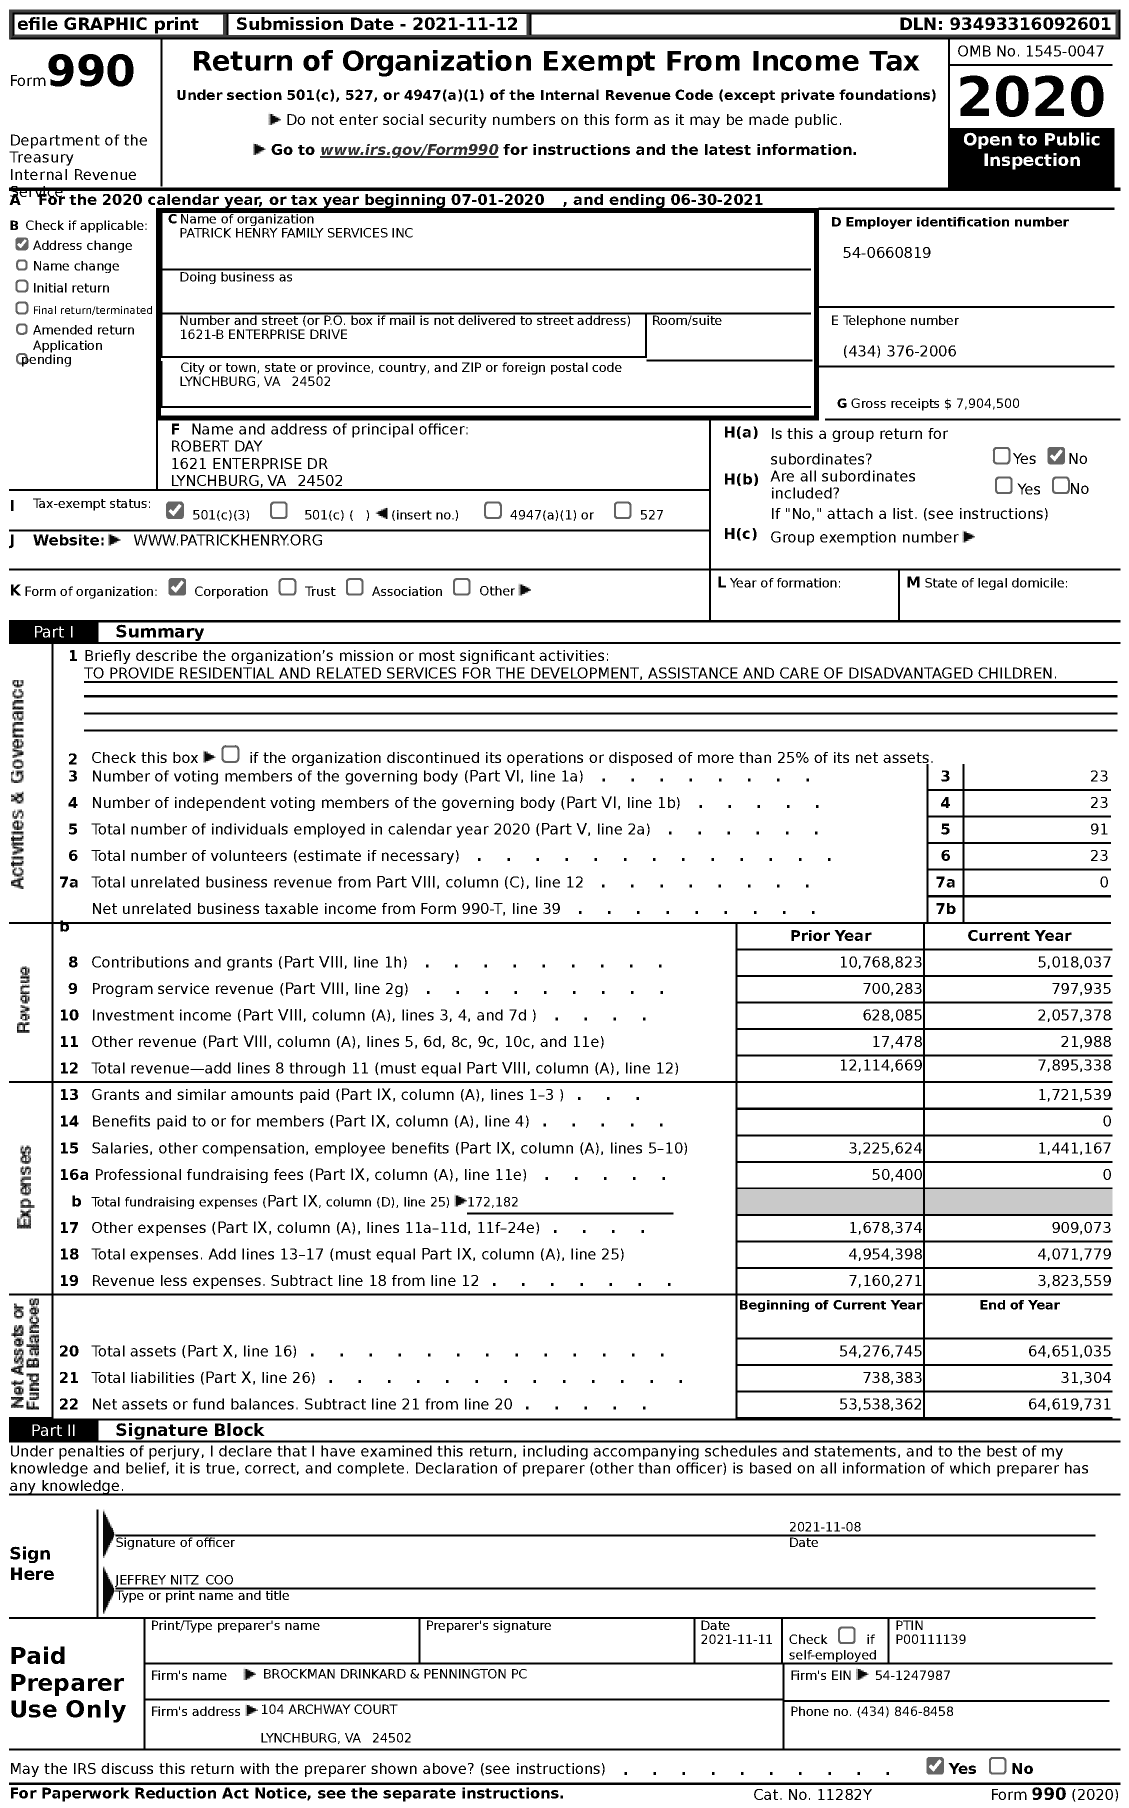 Image of first page of 2020 Form 990 for Patrick Henry Family Services (PHFS)